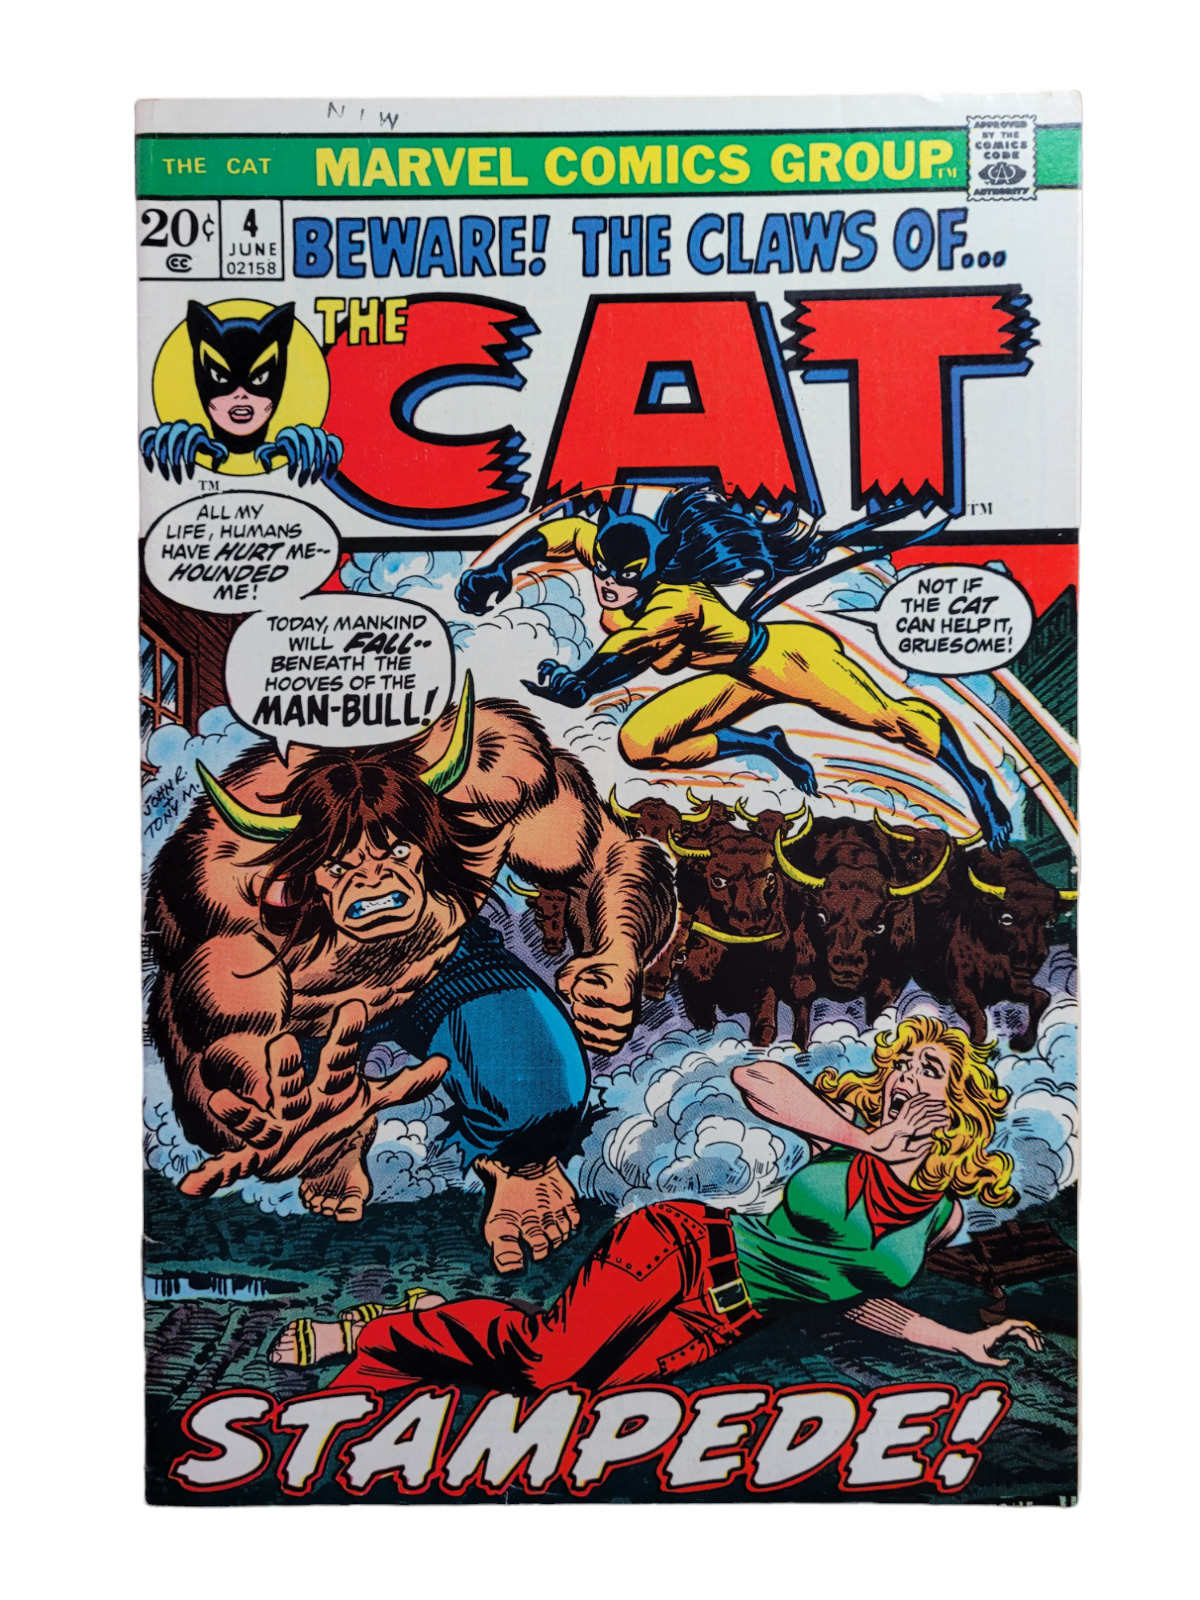 Beware The Claws Of The Cat 4, Starlin, Romita Marvel 1973 FN/VF VF- RAW VINTAGE